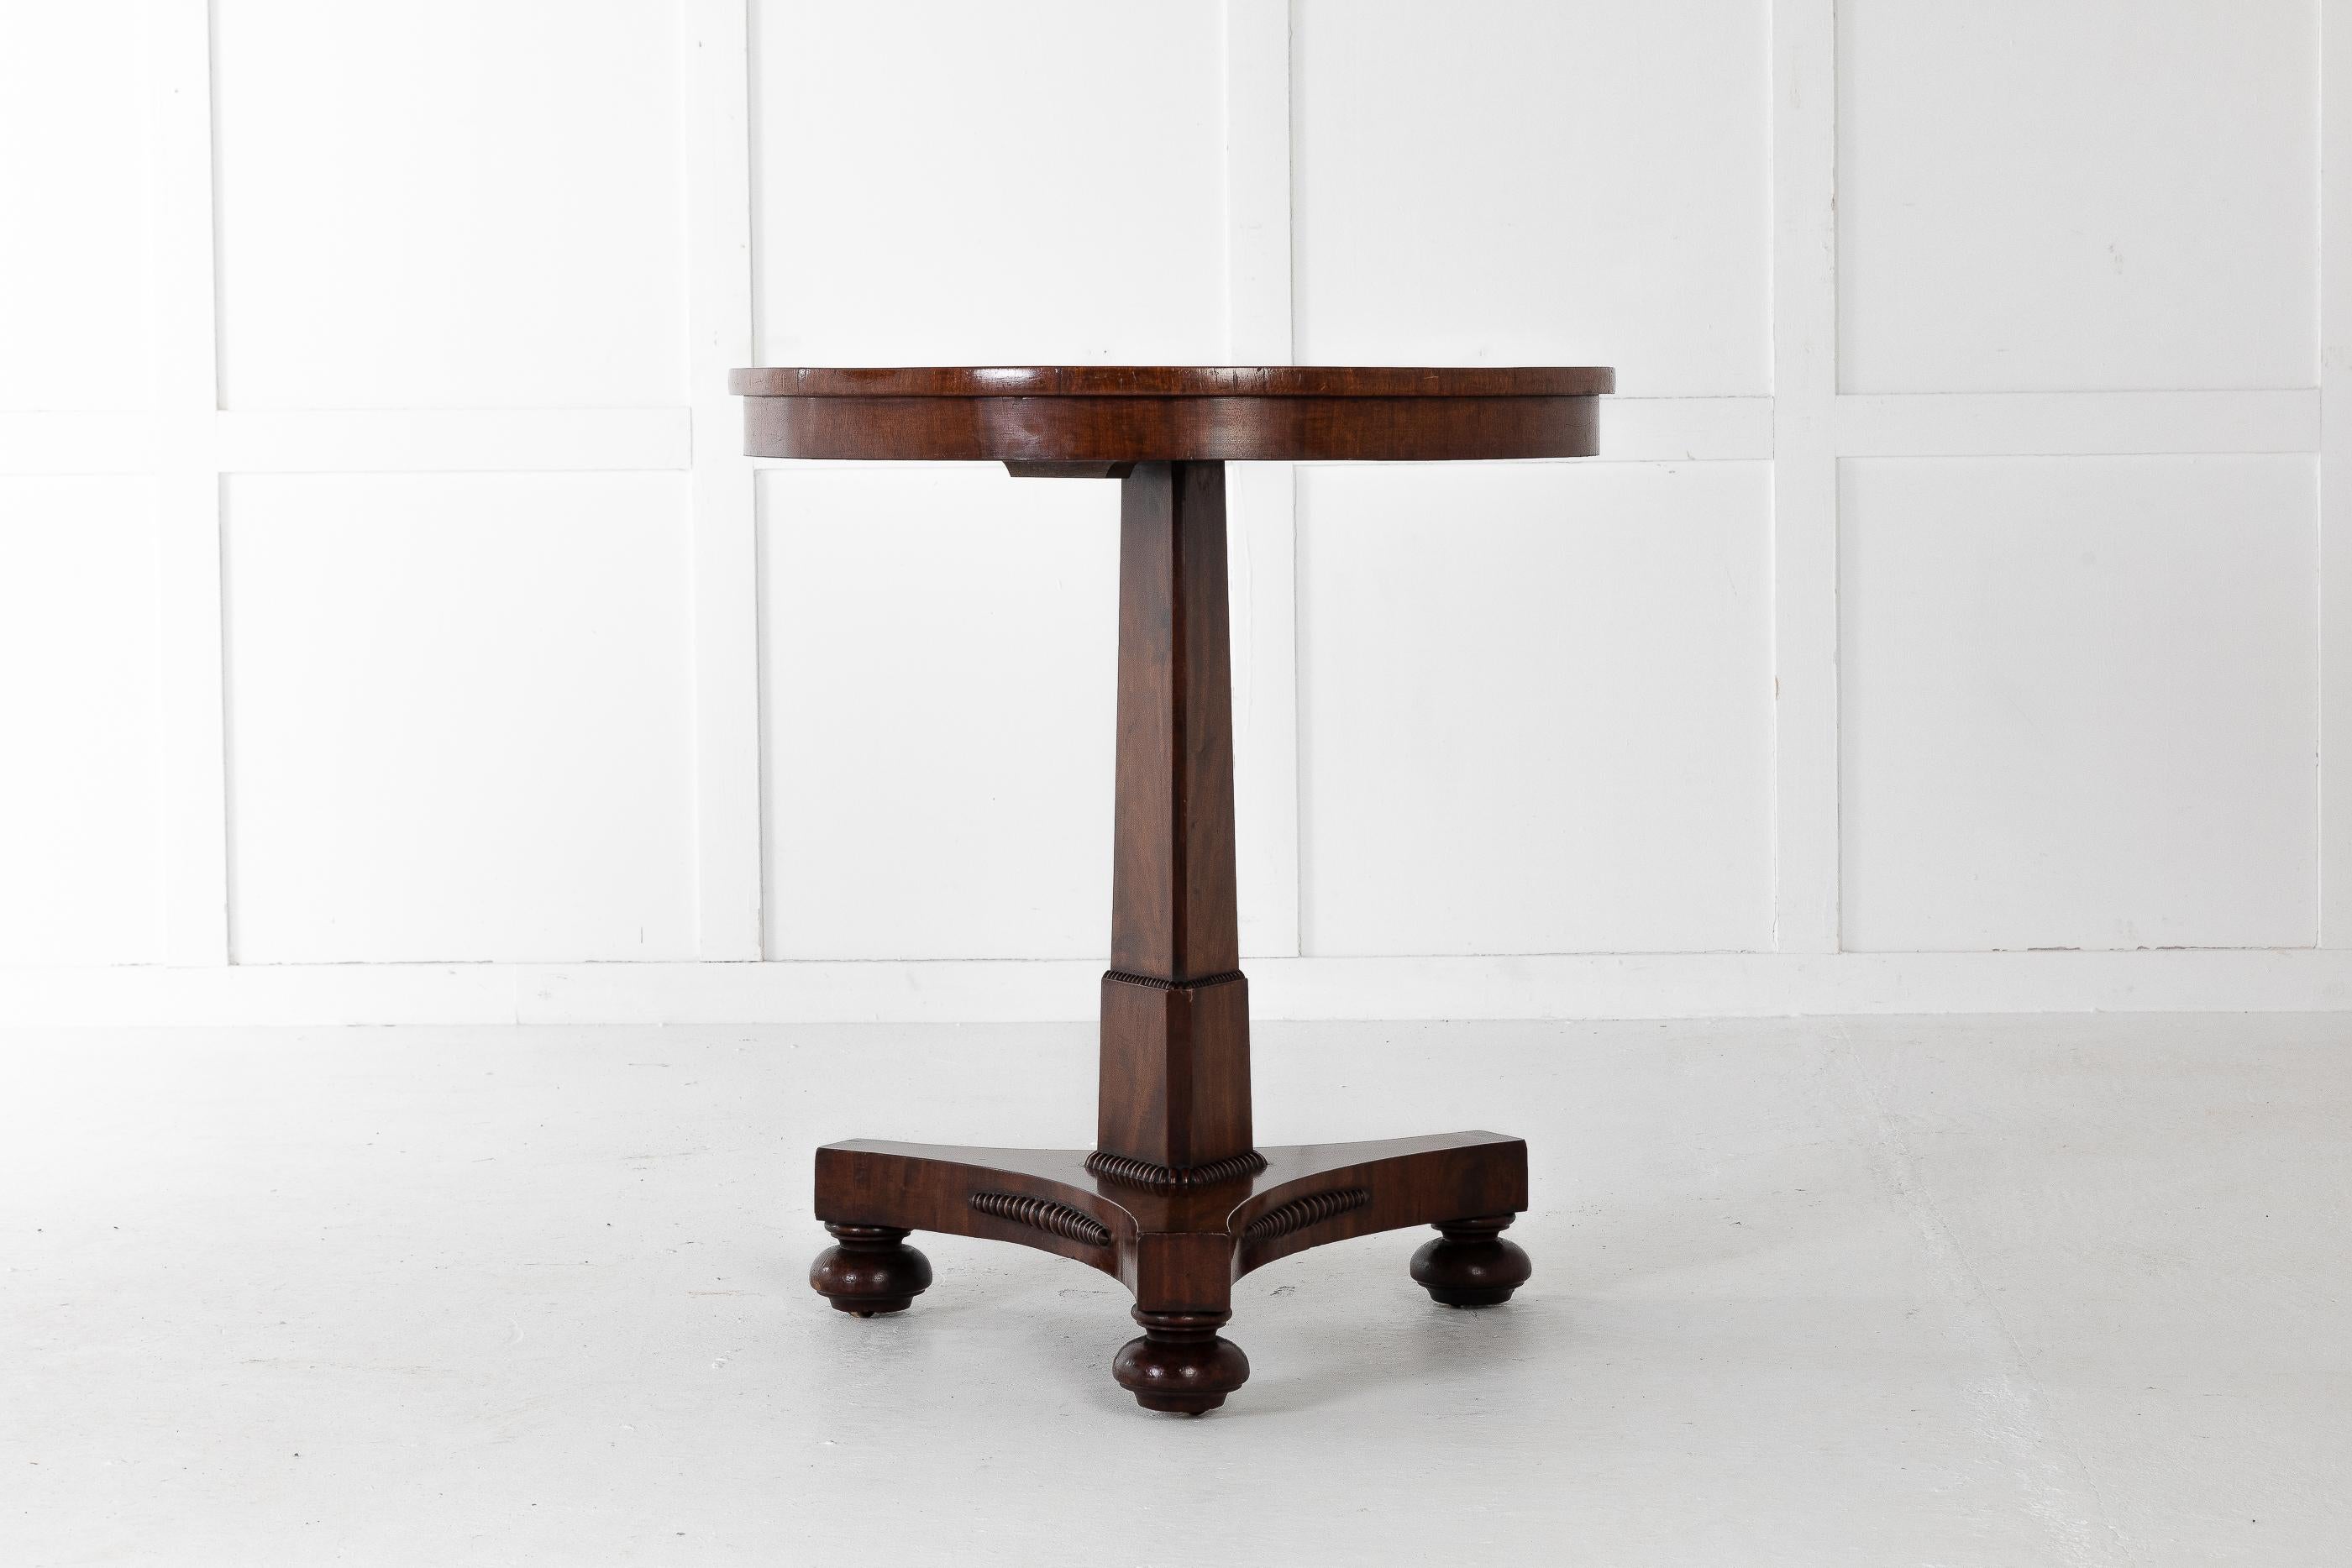 Nicely veneered and cross-banded English 19th century small, lamp table on a tripod base, with bun feet and castors.